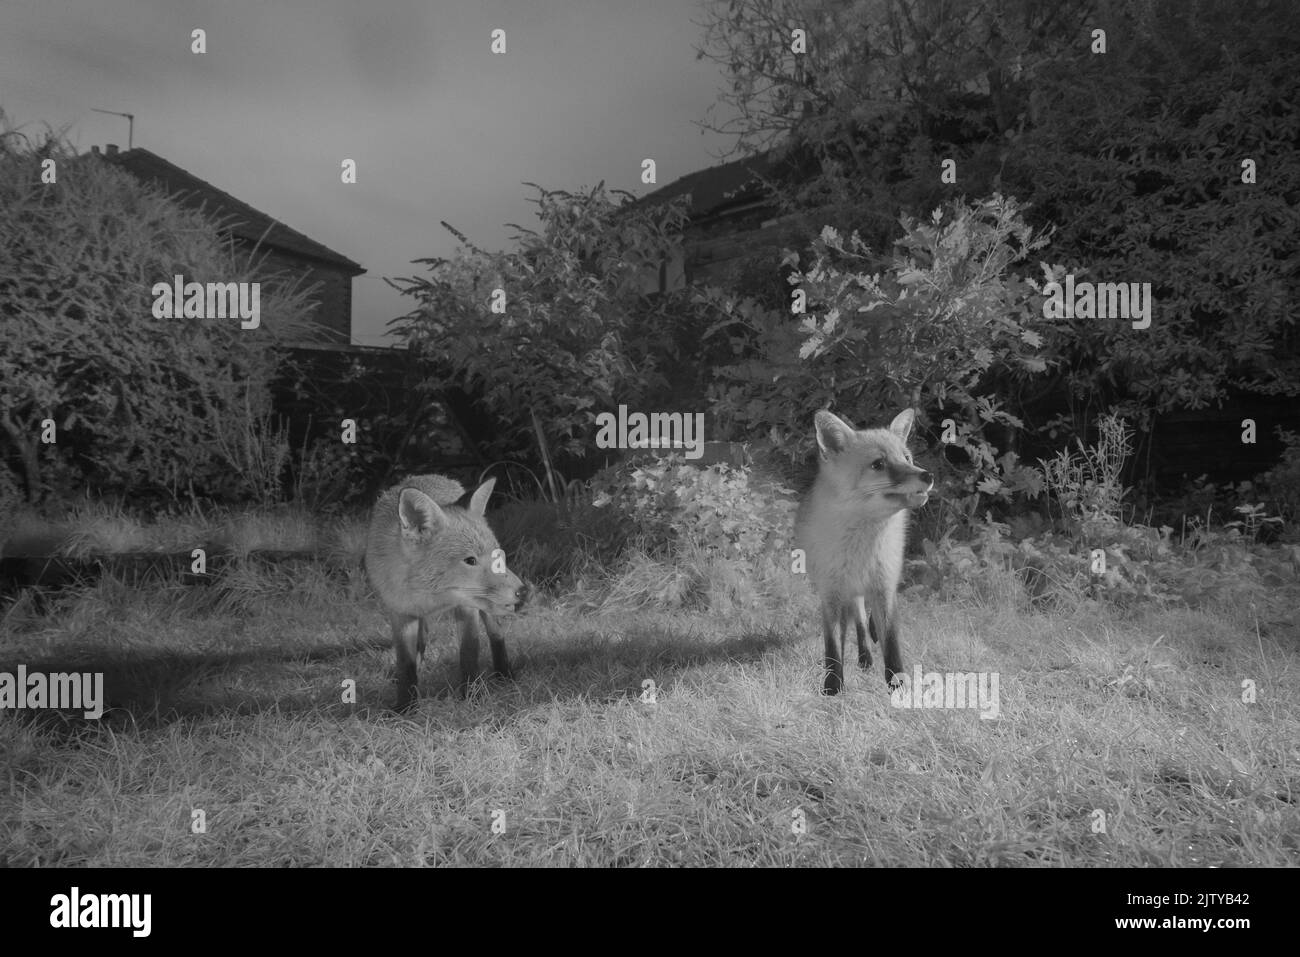 Red foxes (Vulpes vulpes) in urban garden, Greater Manchester. November. Photographed with infra-red converted camera trap. Stock Photo